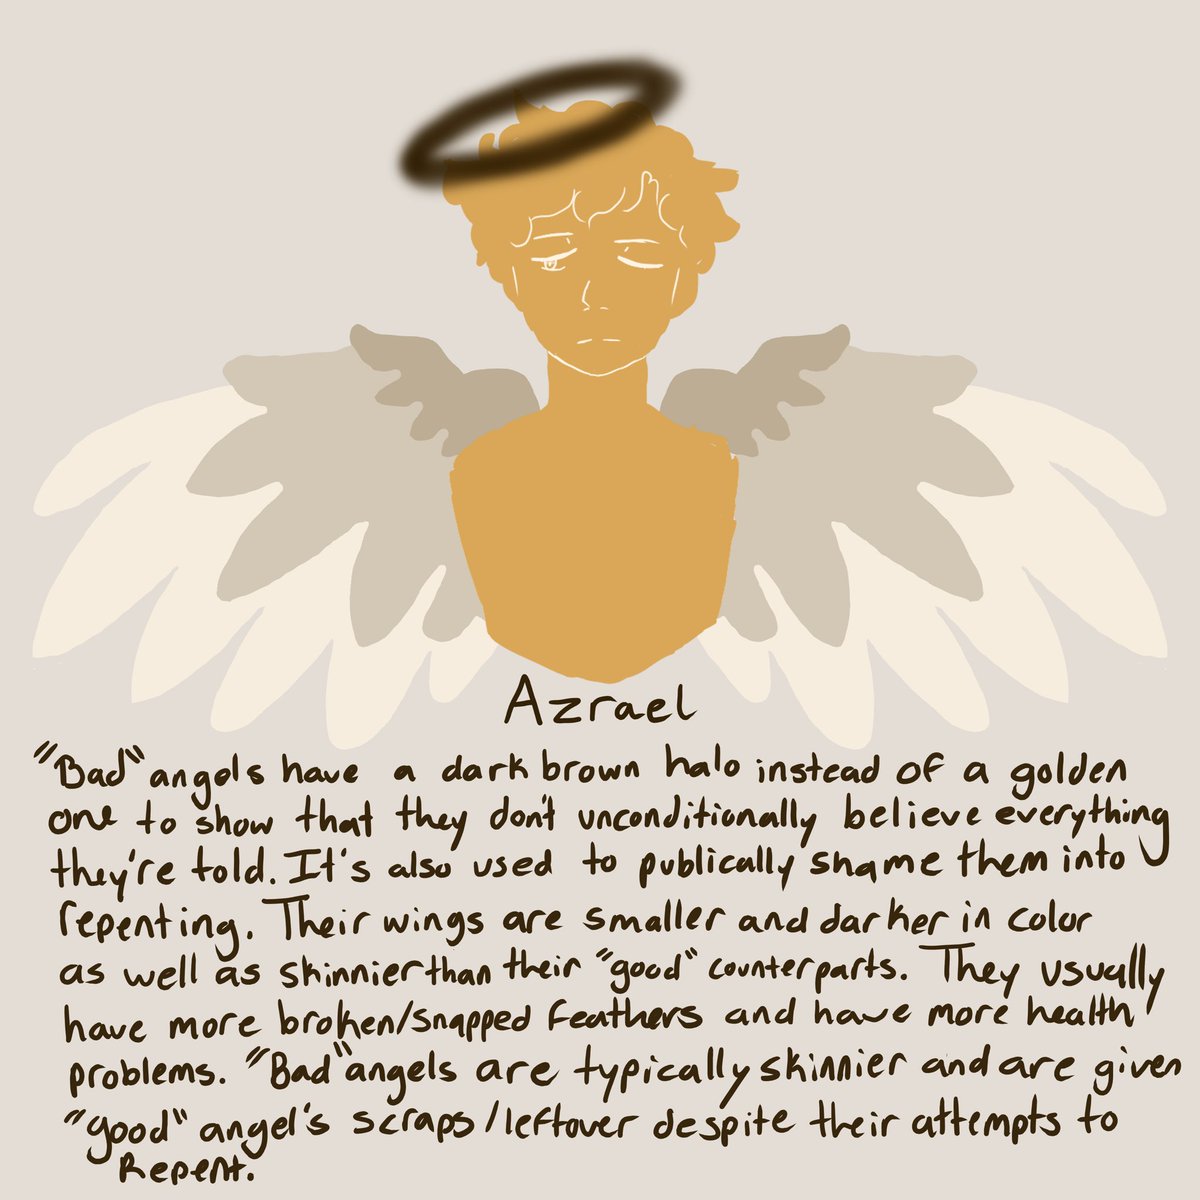 Some angel lore for my comic! I’m redrawing the old cover for the name reveal right now! 
-
#ocs #lore #oclore #originalcharacters #comiclore #oc #originalcharacterlore